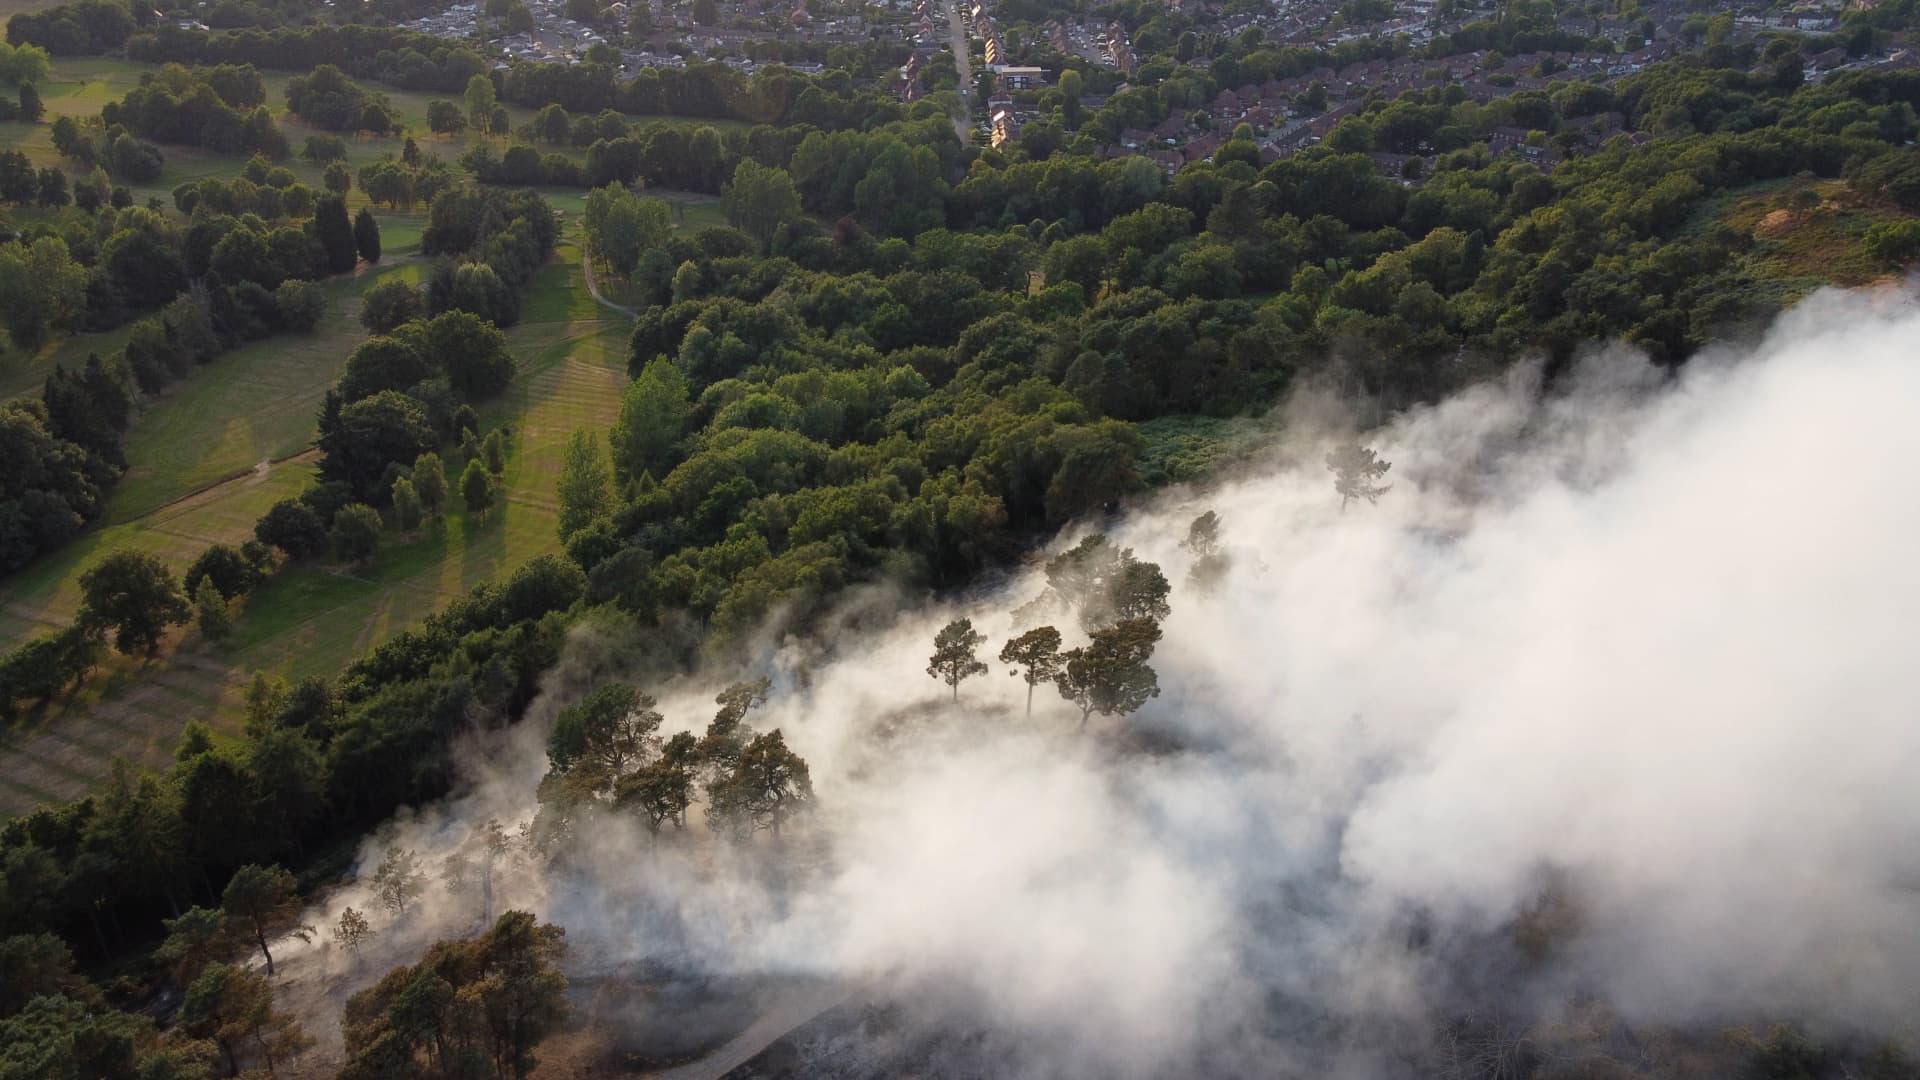 Firefighters respond to a large wildfire that has broken out in woodland at Lickey Hills Country Park on the edge of Birmingham.